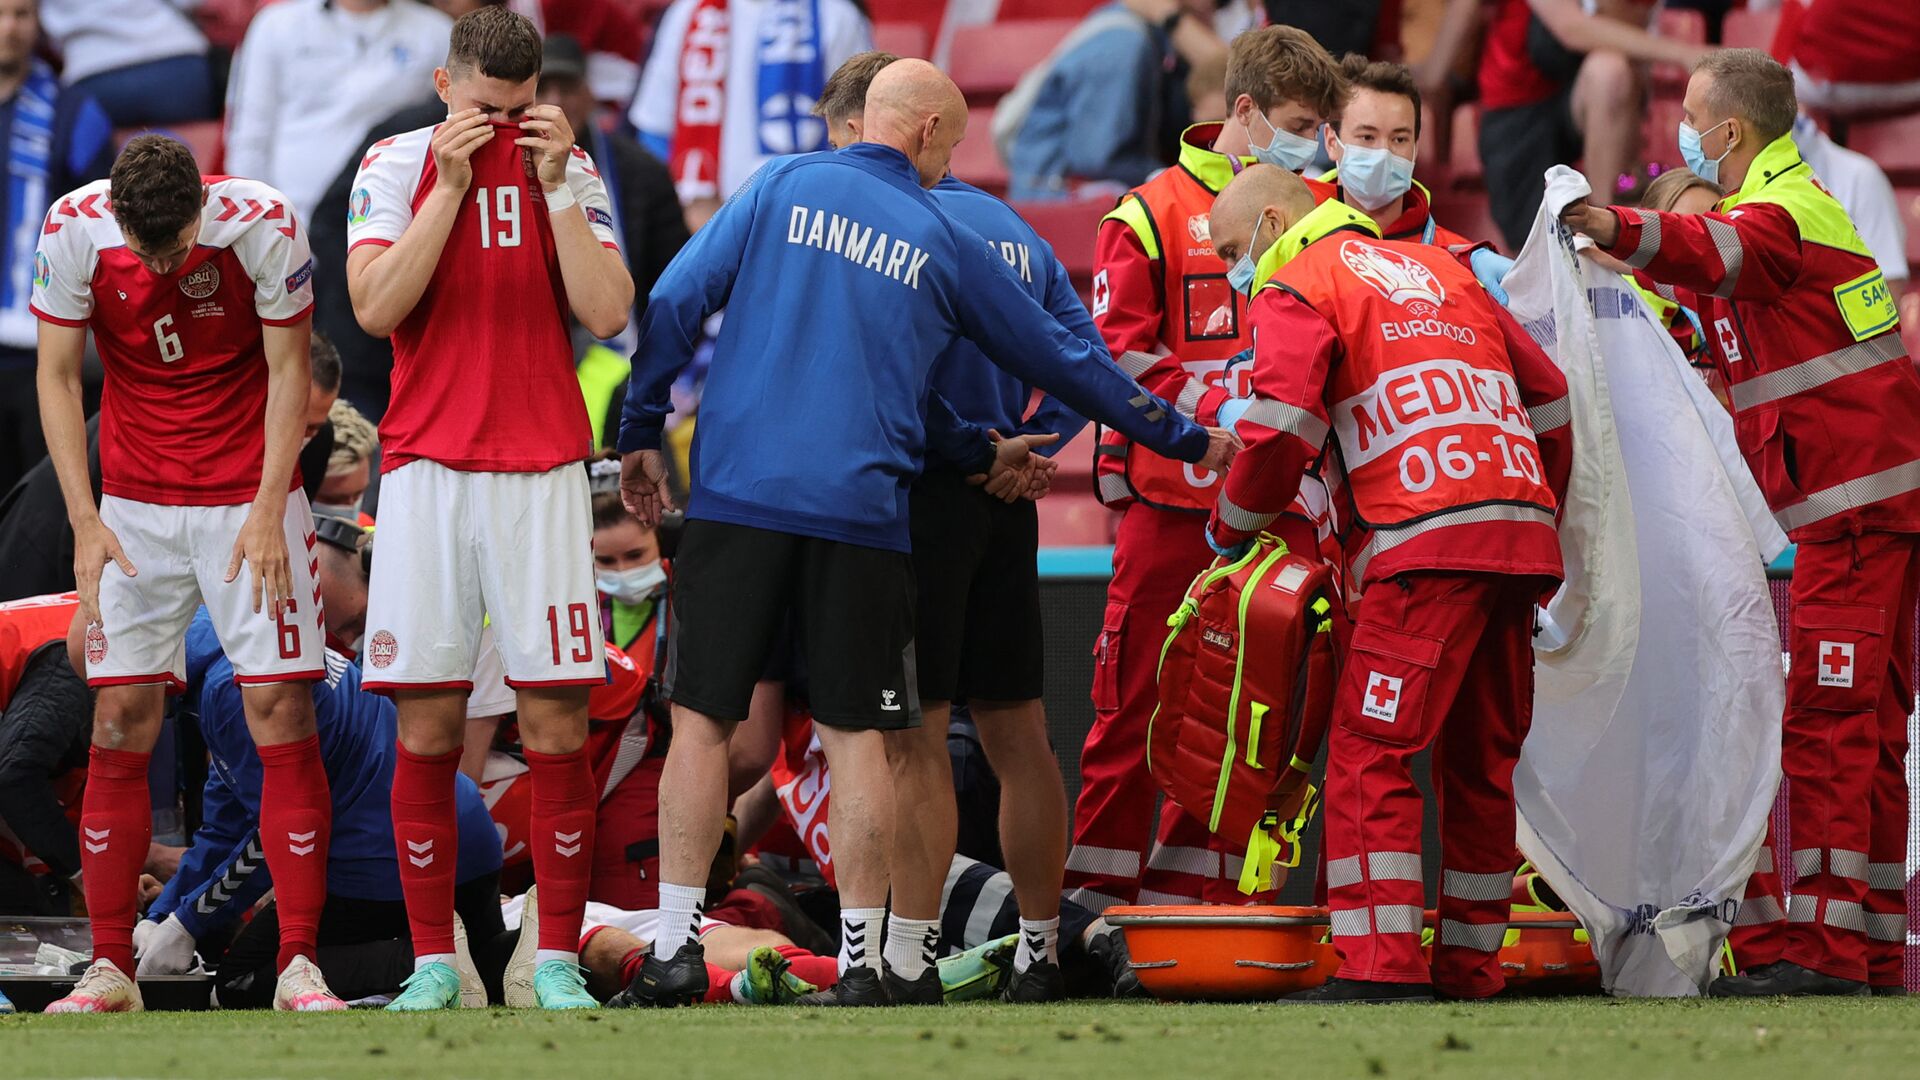 Denmark's players react as paramedics attend to Denmark's midfielder Christian Eriksen after he collapsed on the pitch during the UEFA EURO 2020 Group B football match between Denmark and Finland at the Parken Stadium in Copenhagen on June 12, 2021. - اسپوتنیک افغانستان  , 1920, 12.06.2022